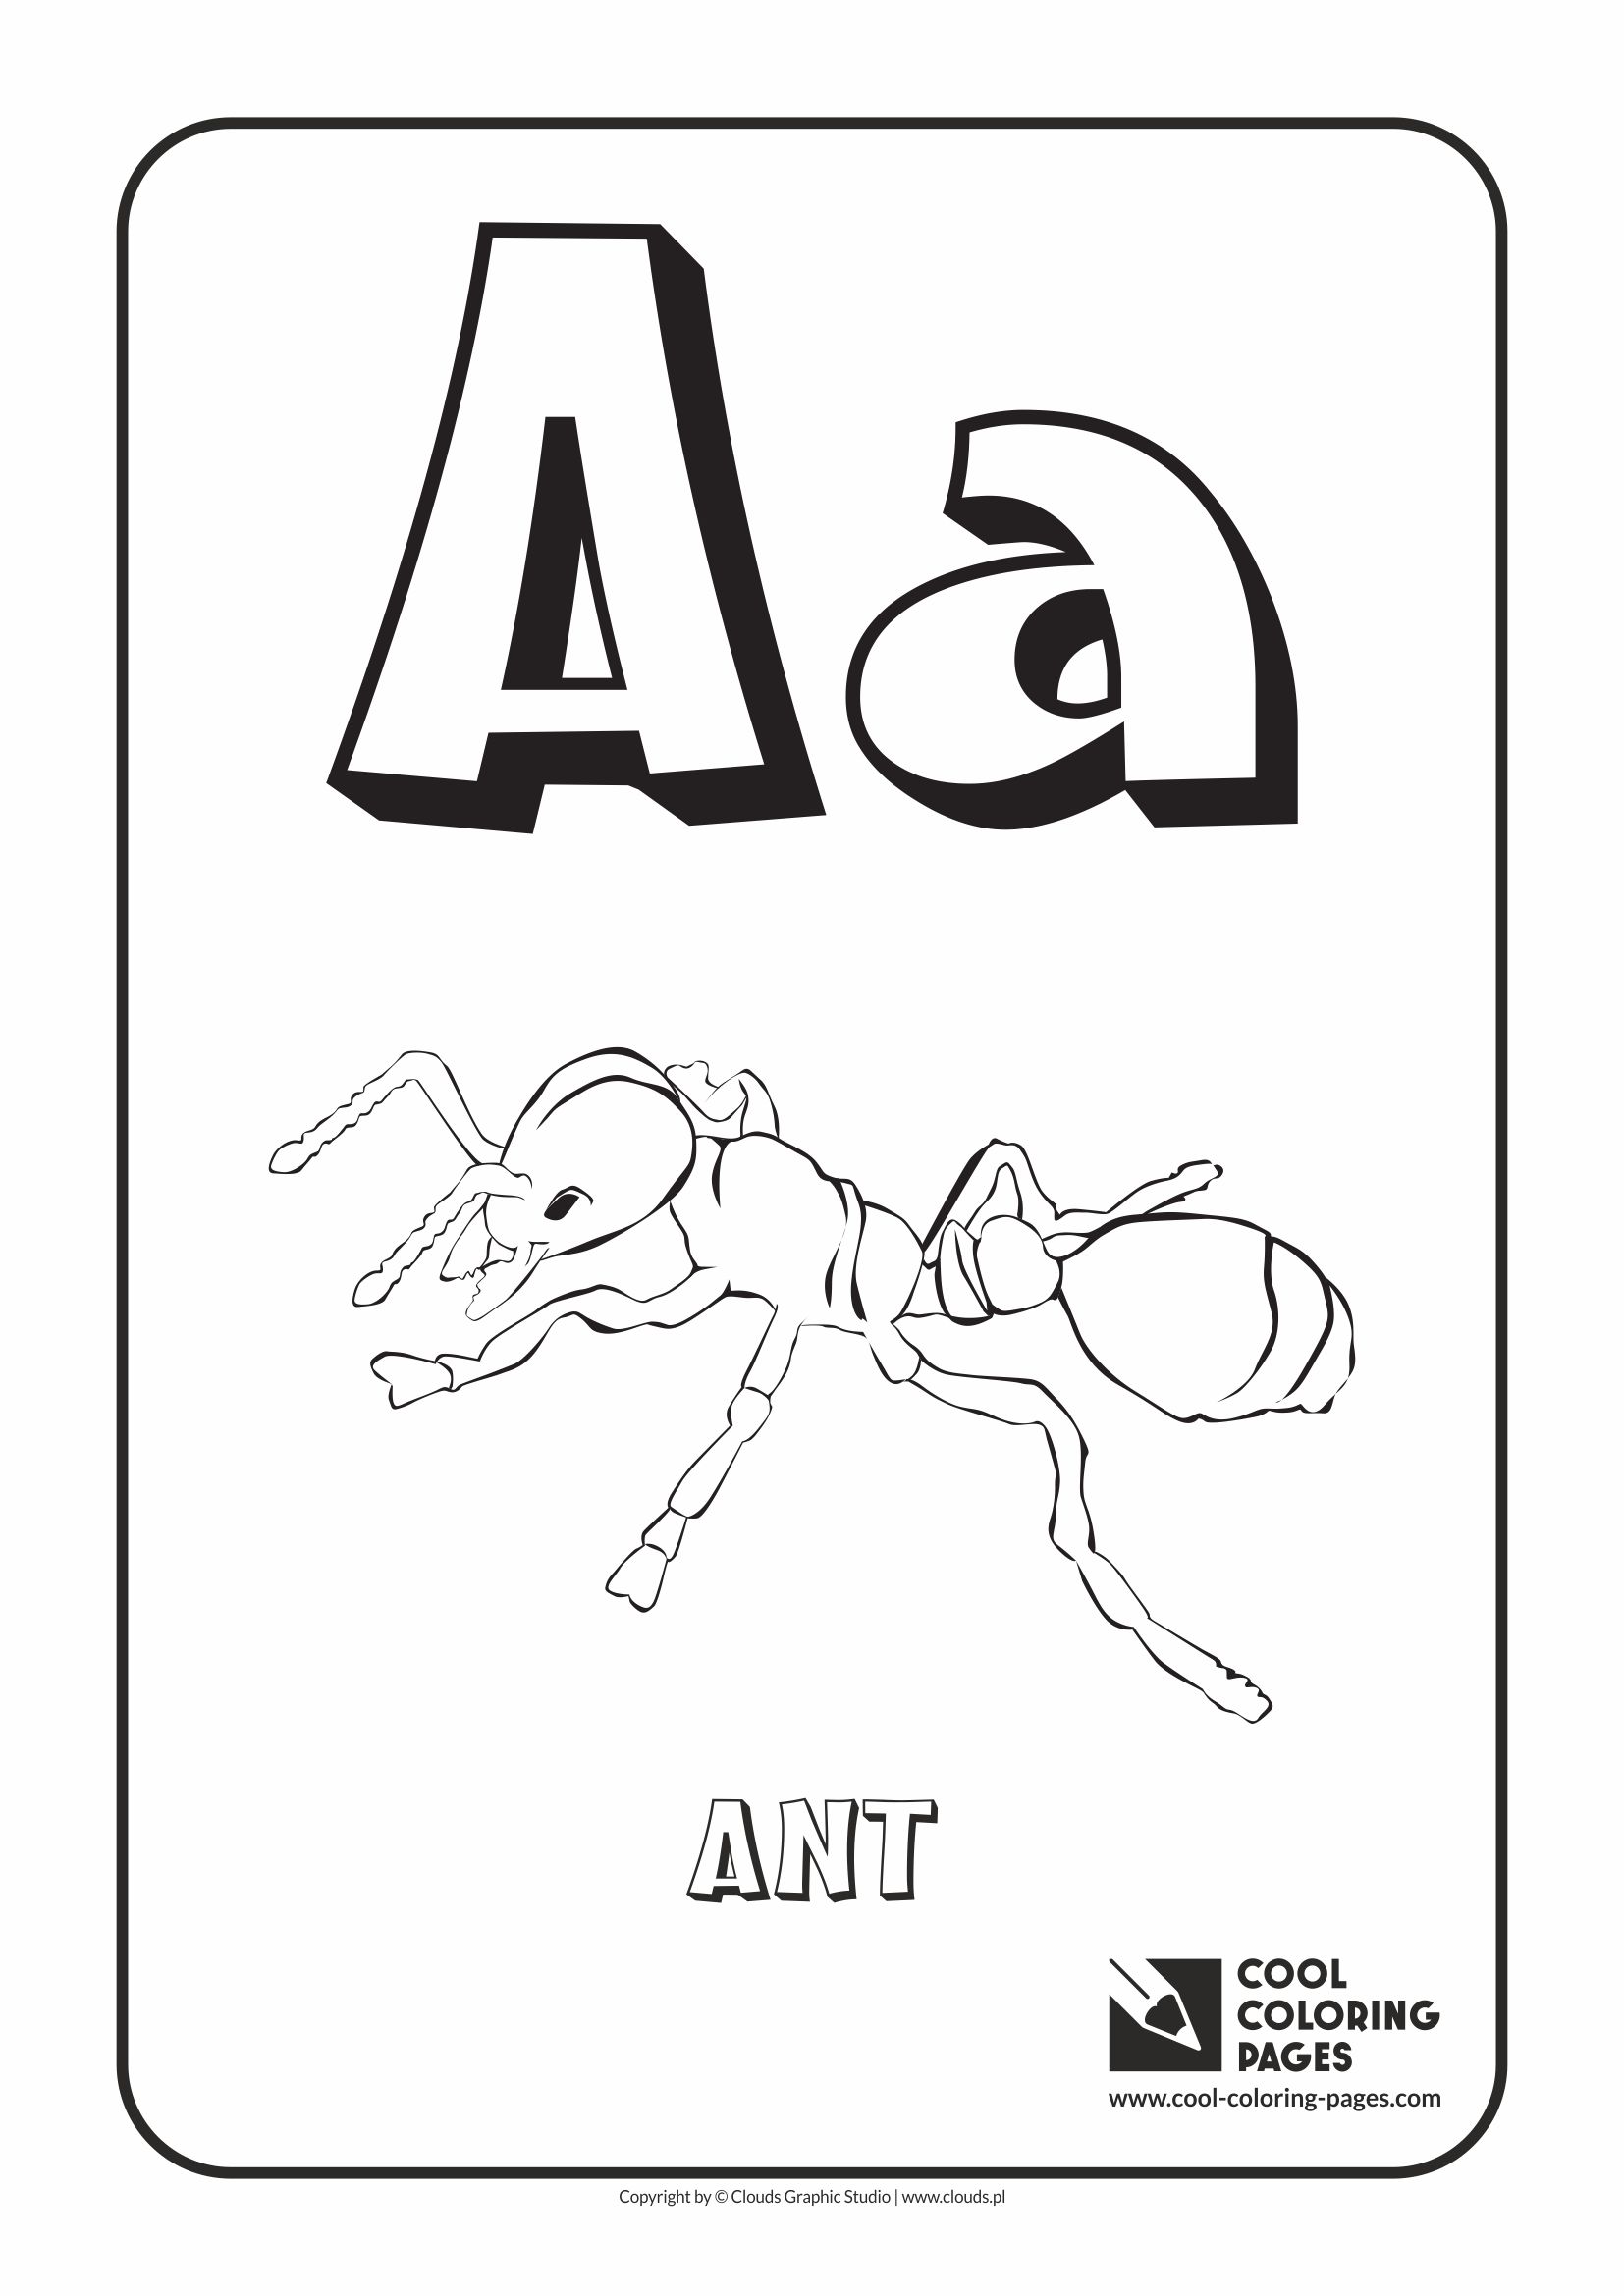 Download Cool Coloring Pages Alphabet coloring pages - Cool ...